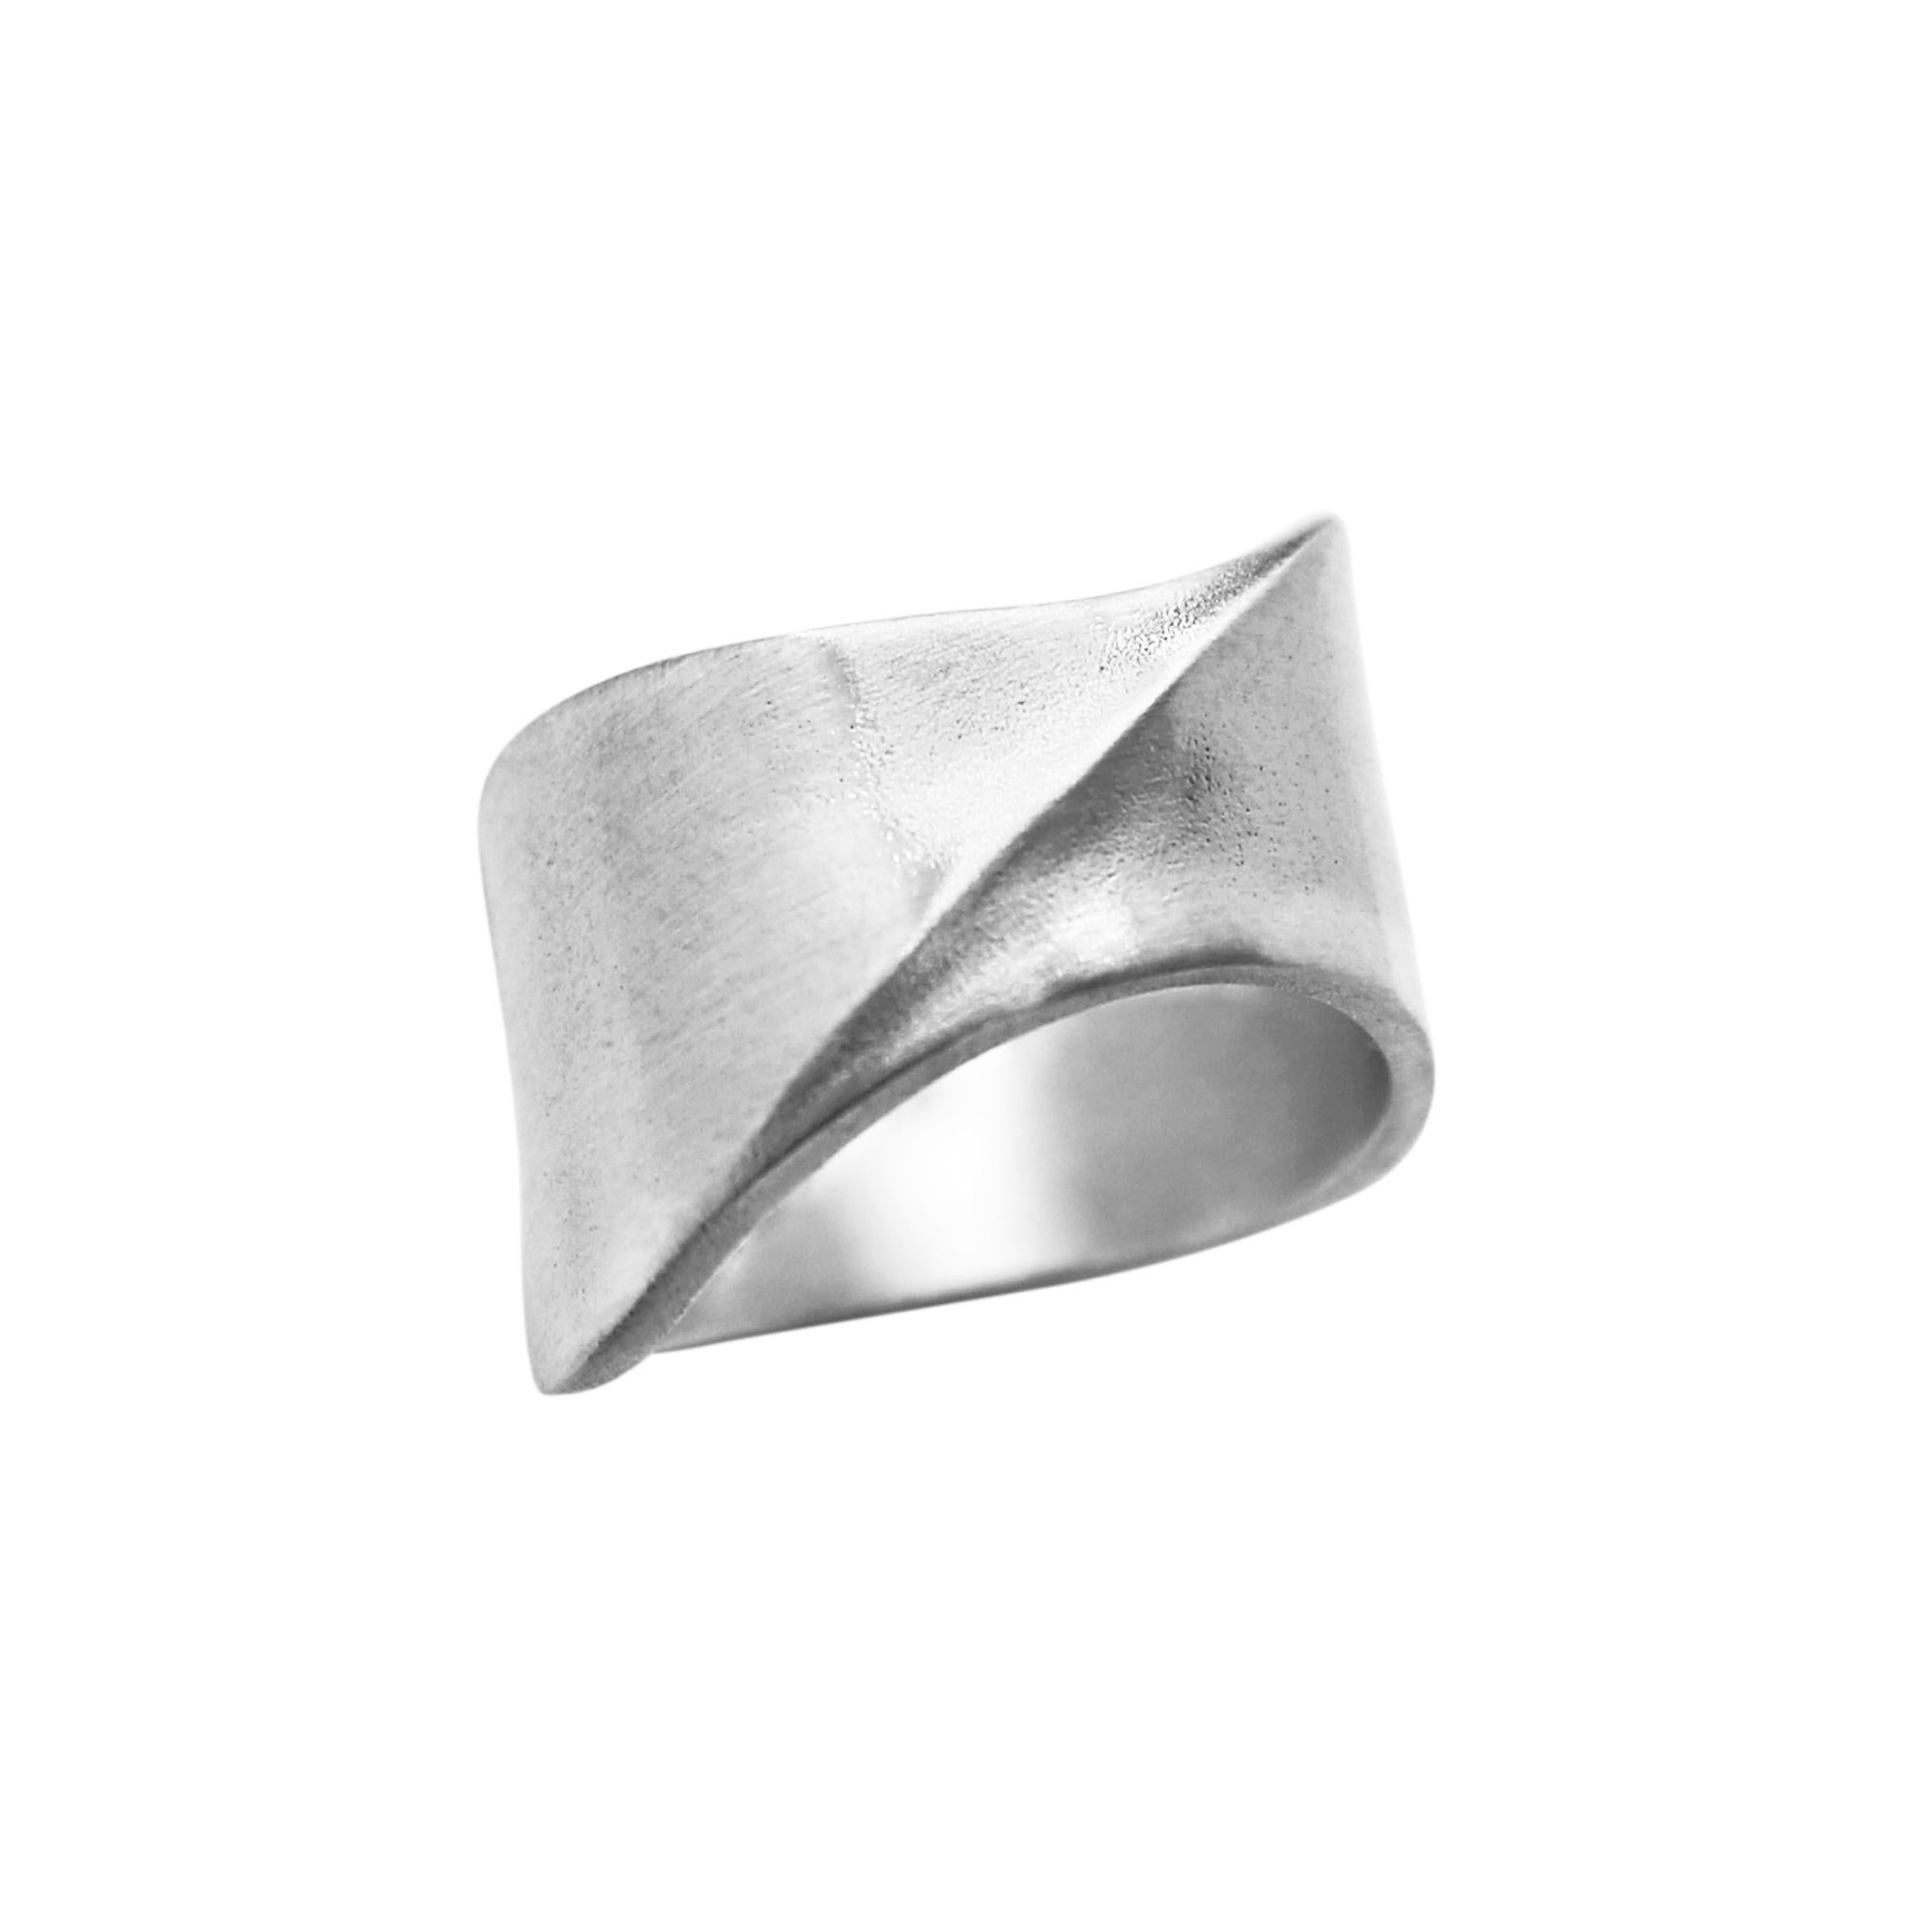 uk size q ring in us